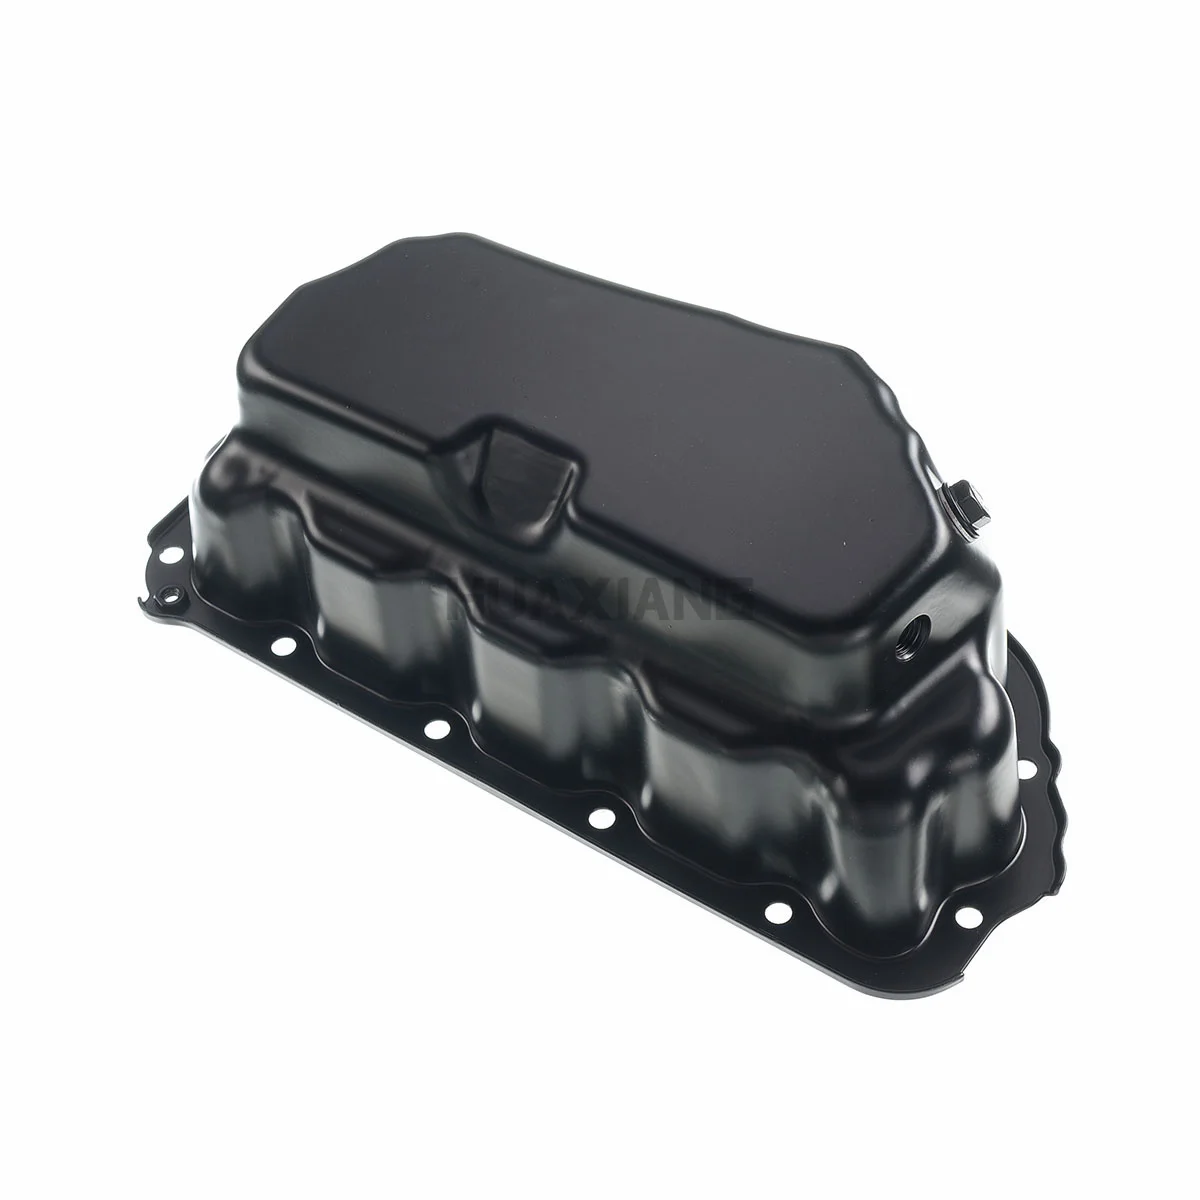 

RTS Lower Oil Pan For Mercedes-Benz ML350 V6 3.0L 2012 2013 2014 Diesel A6420102528 A642-010-25-28